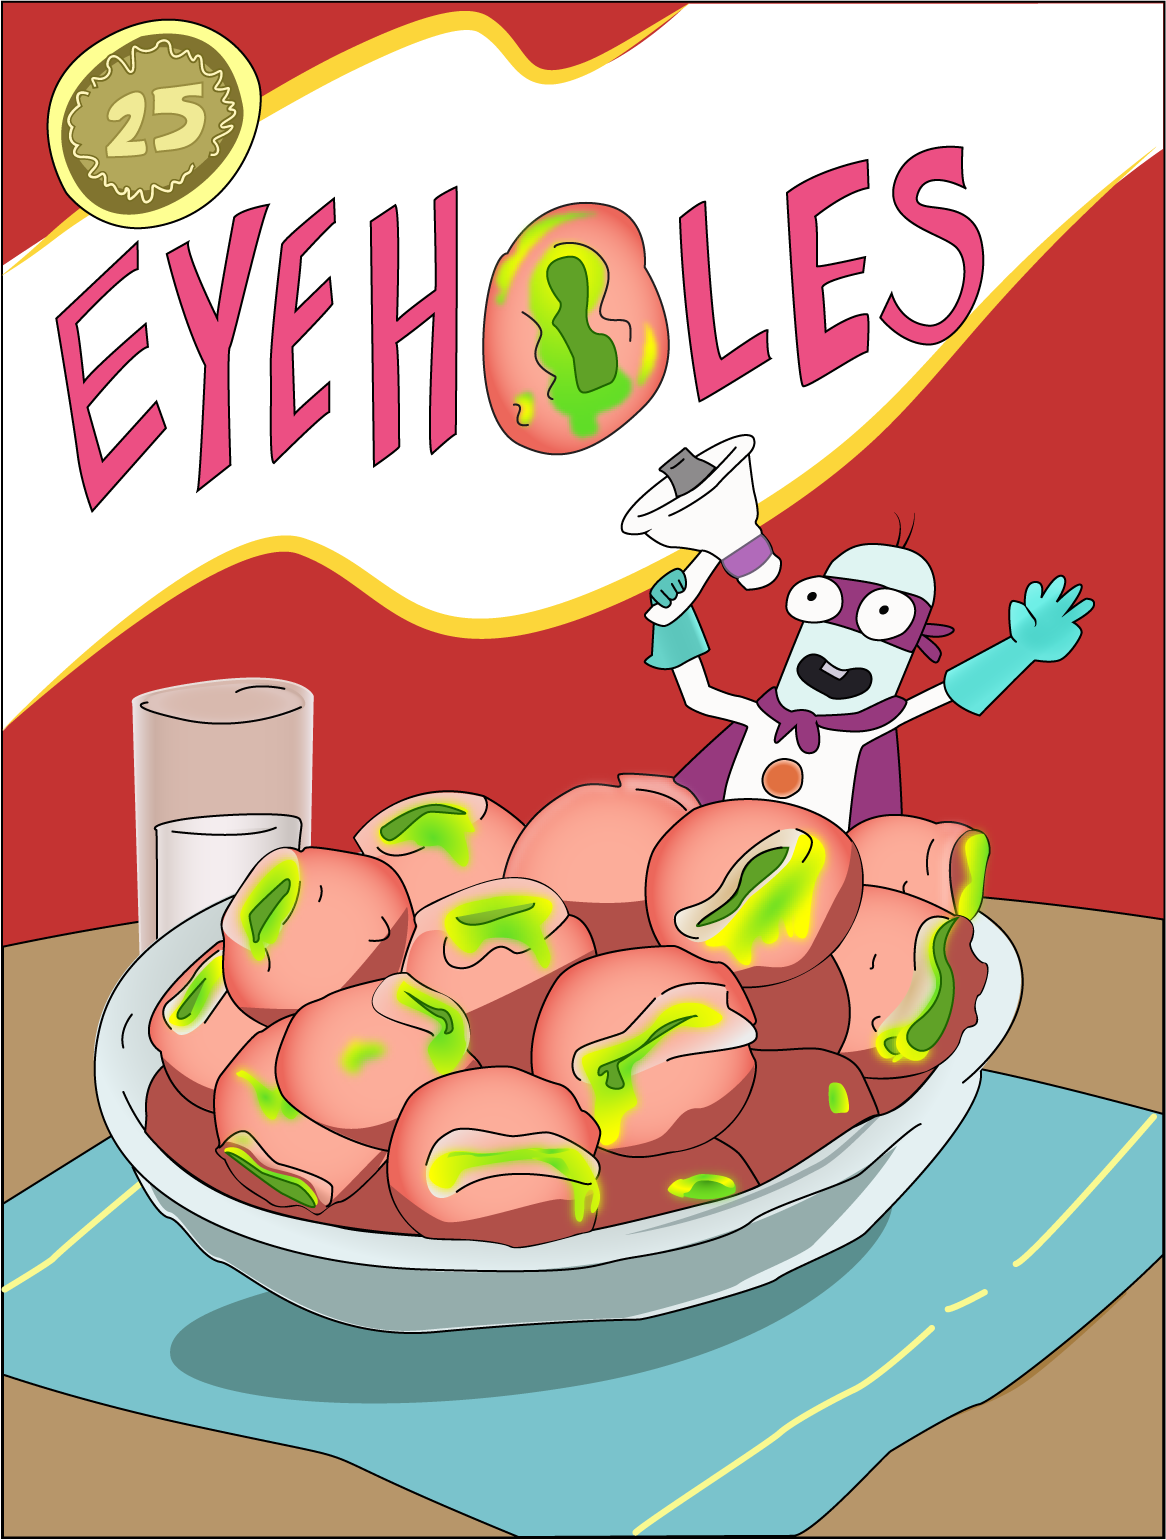 Rick and Morty Eyeholes Cereal Box Graphic